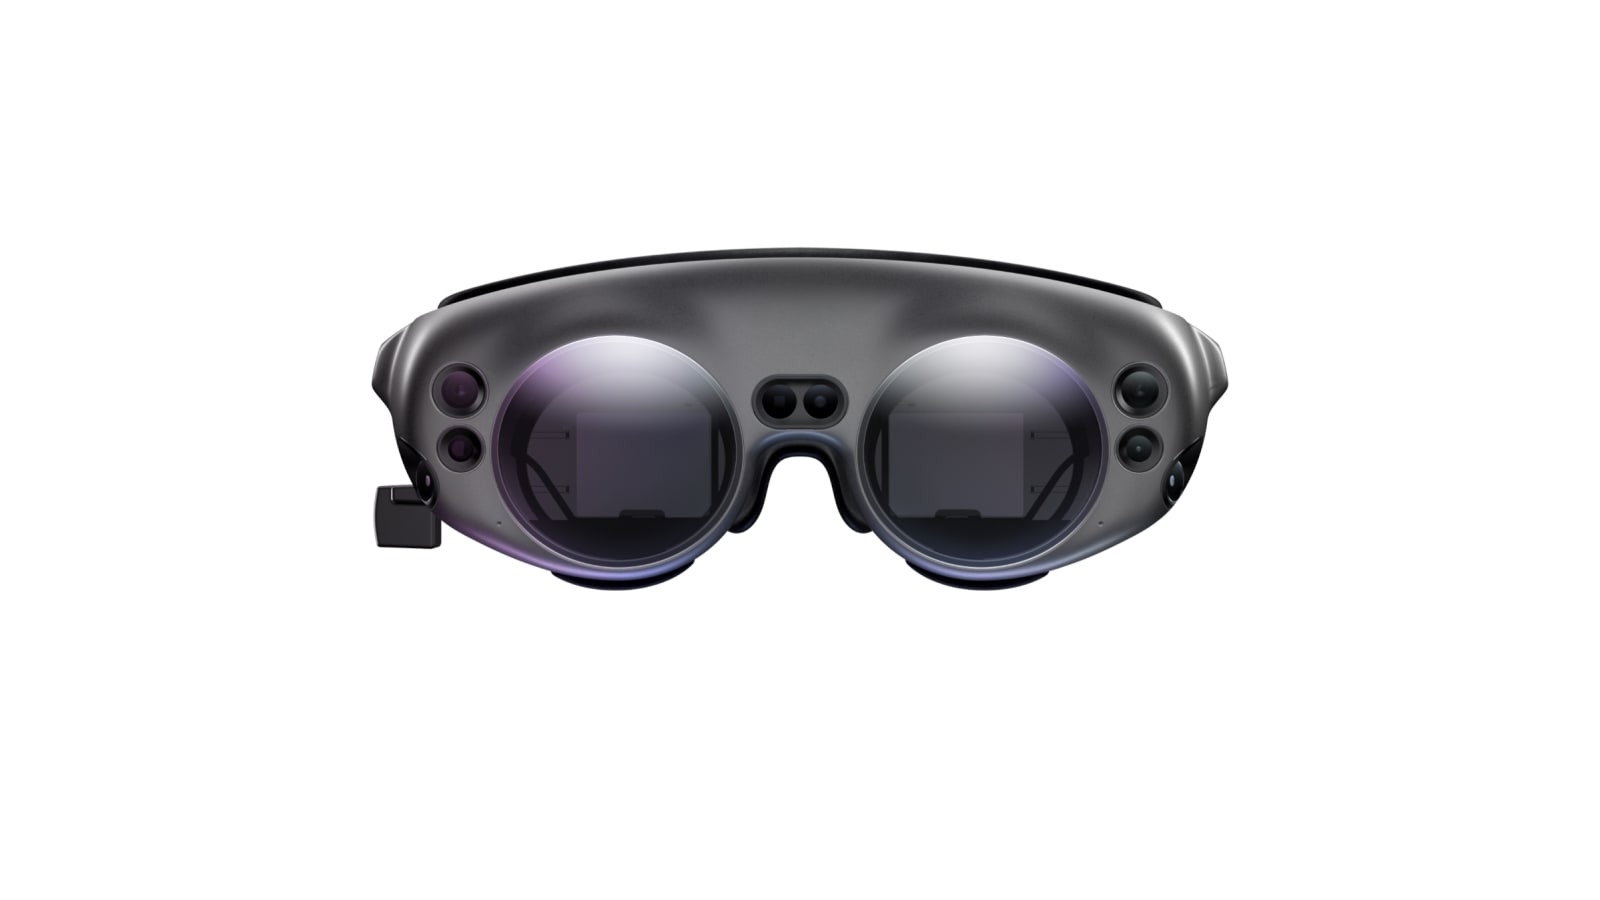 Magic Leap 2 headset merges VR and AR into one device, delivers spectacular image quality and FOV